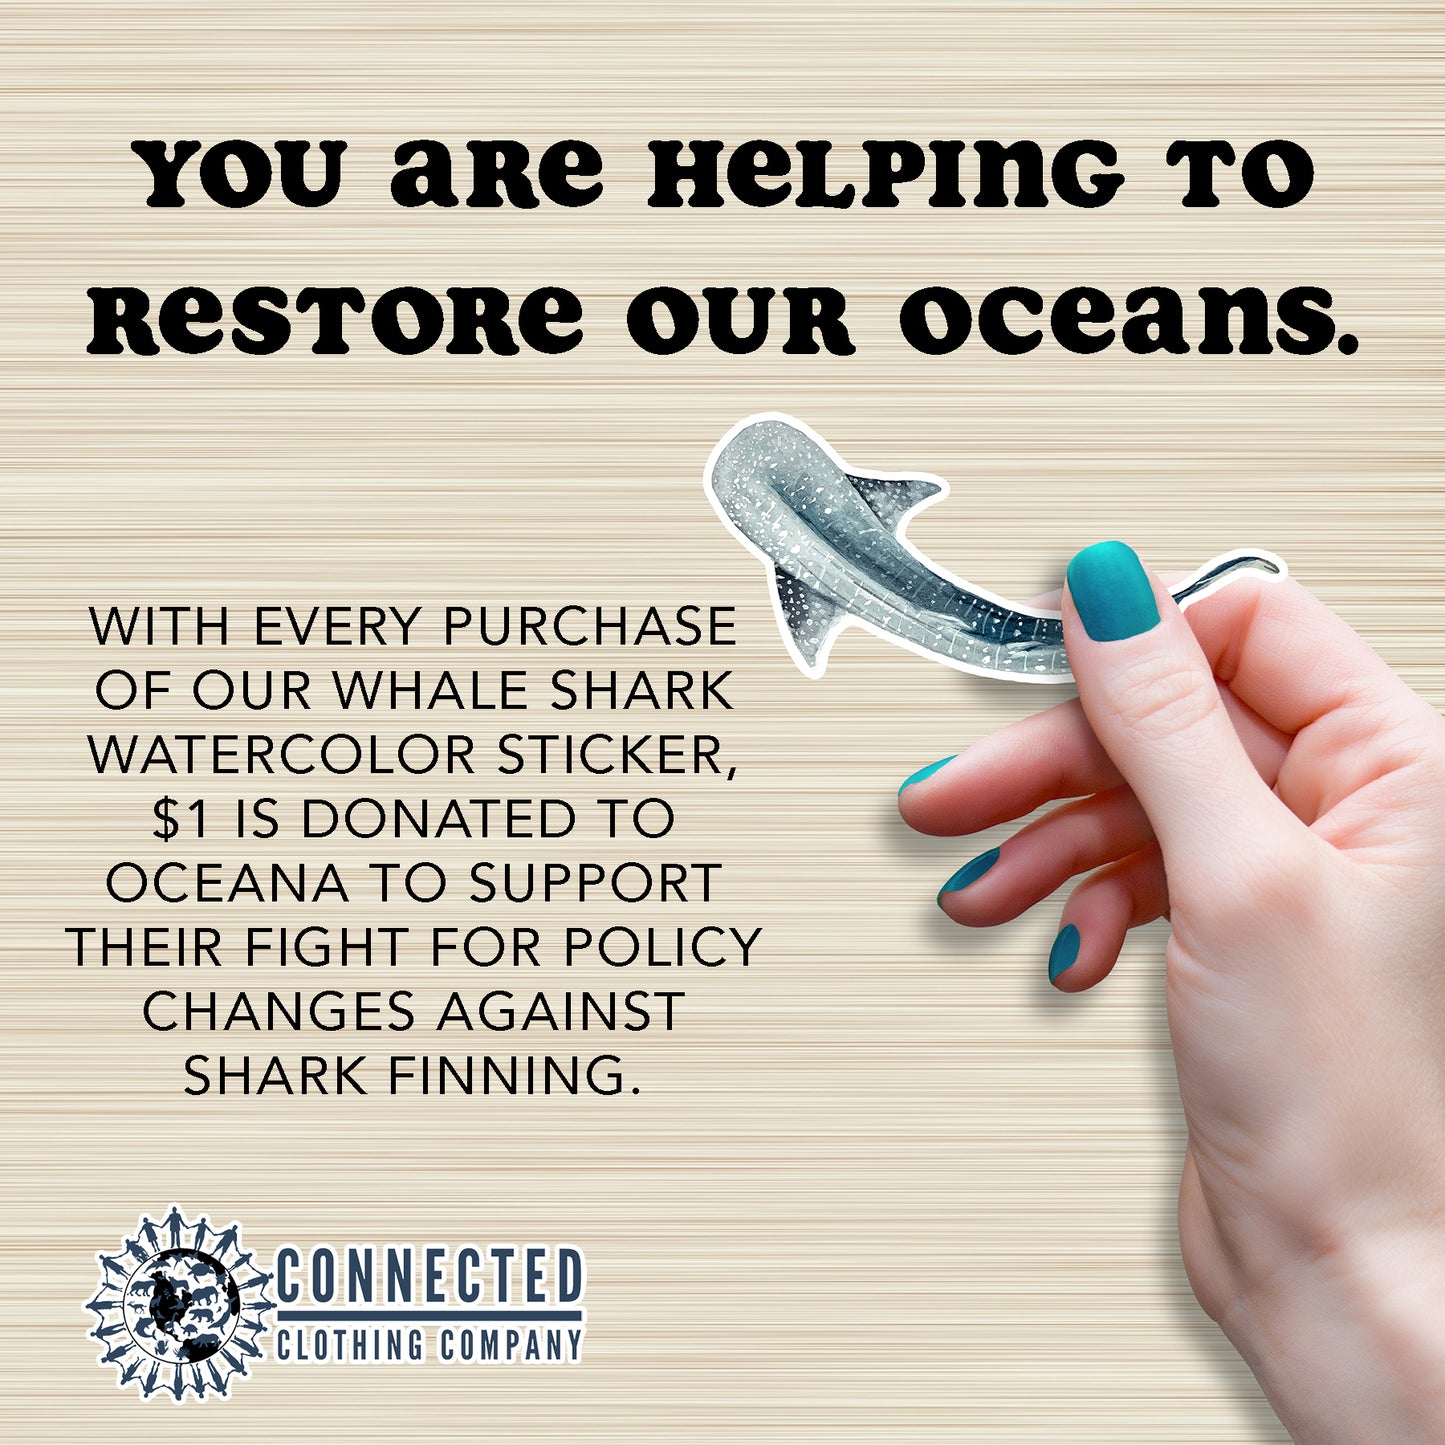 Hand Holding Whale Shark Watercolor Sticker - "You are helping to restore our oceans. With every purchase of our whale shark watercolor sticker, $1 is donated to oceana to support their fight for policy changes against shark finning." - Connected Clothing Company - Ethical and Sustainable Apparel - portion of profits donated to shark conservation